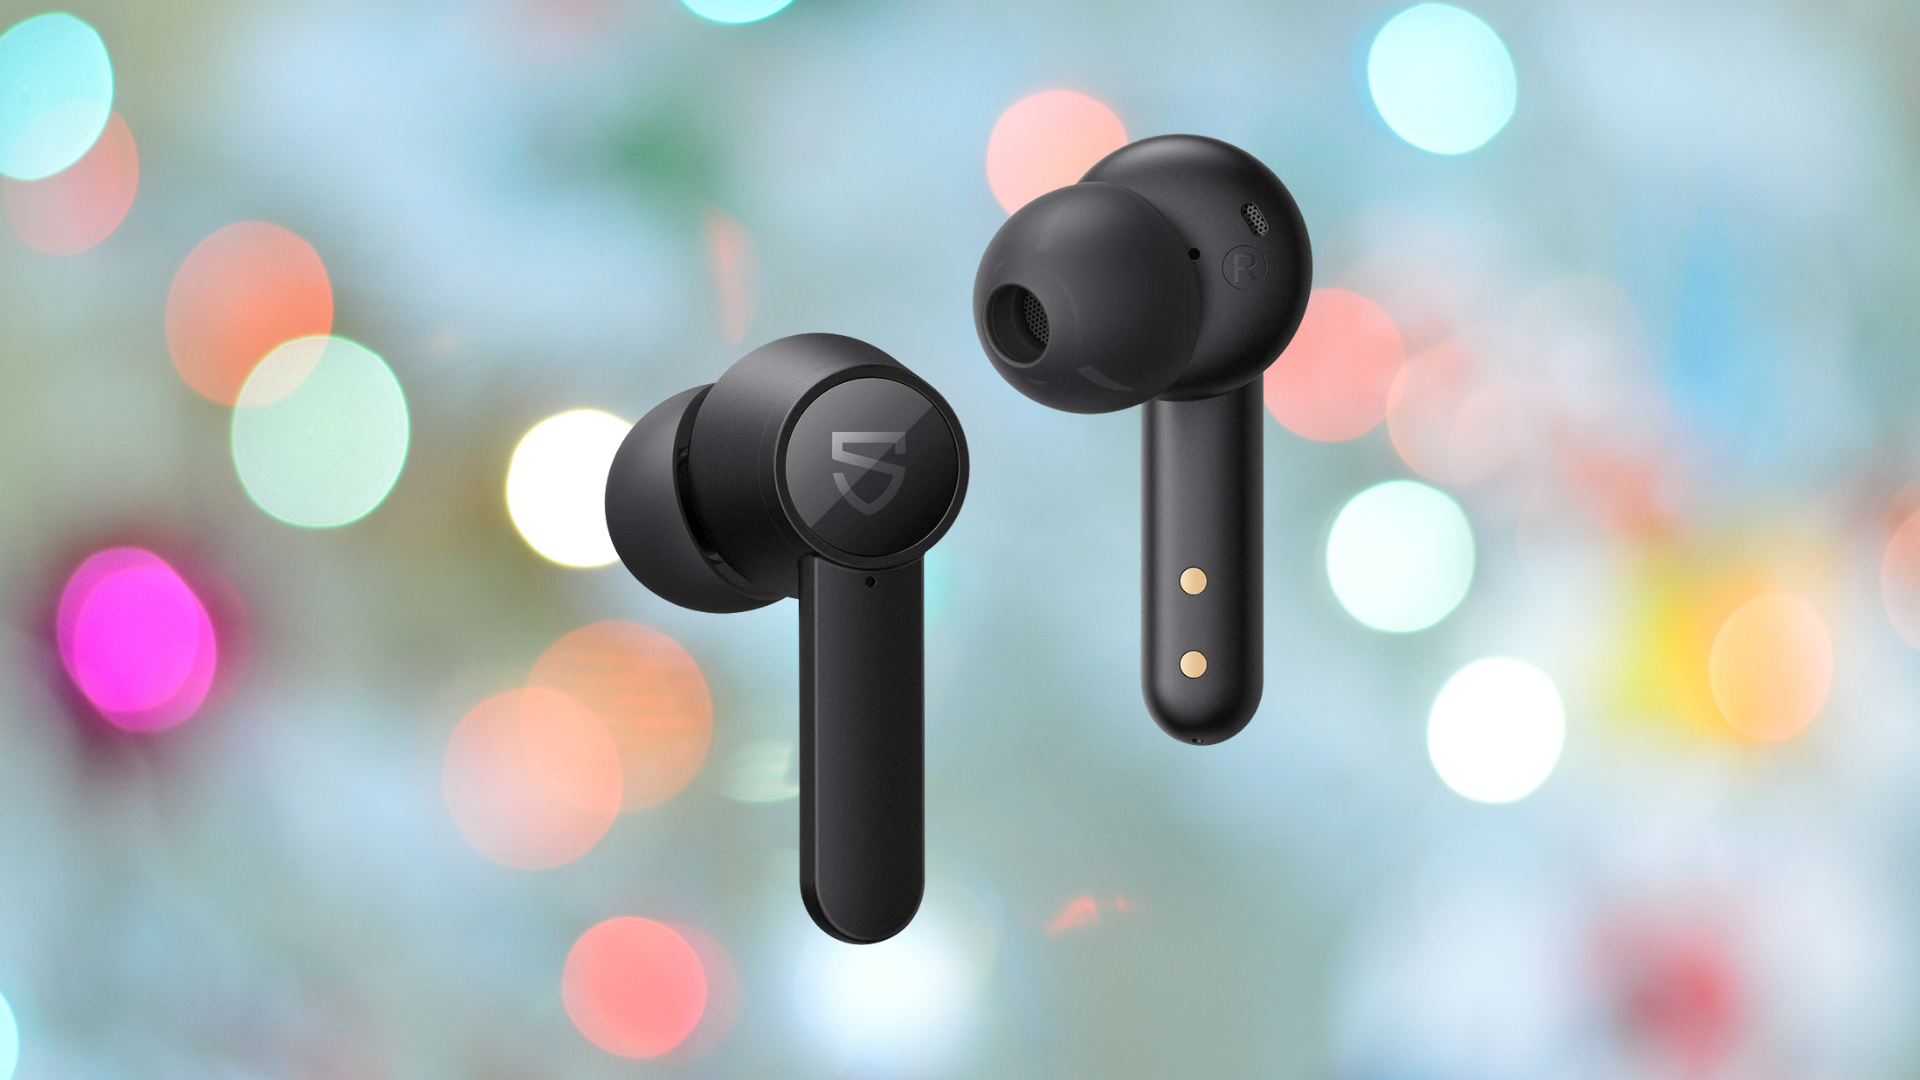 Use this secret code to get these top-rated wireless earbuds for just $18 at Amazon